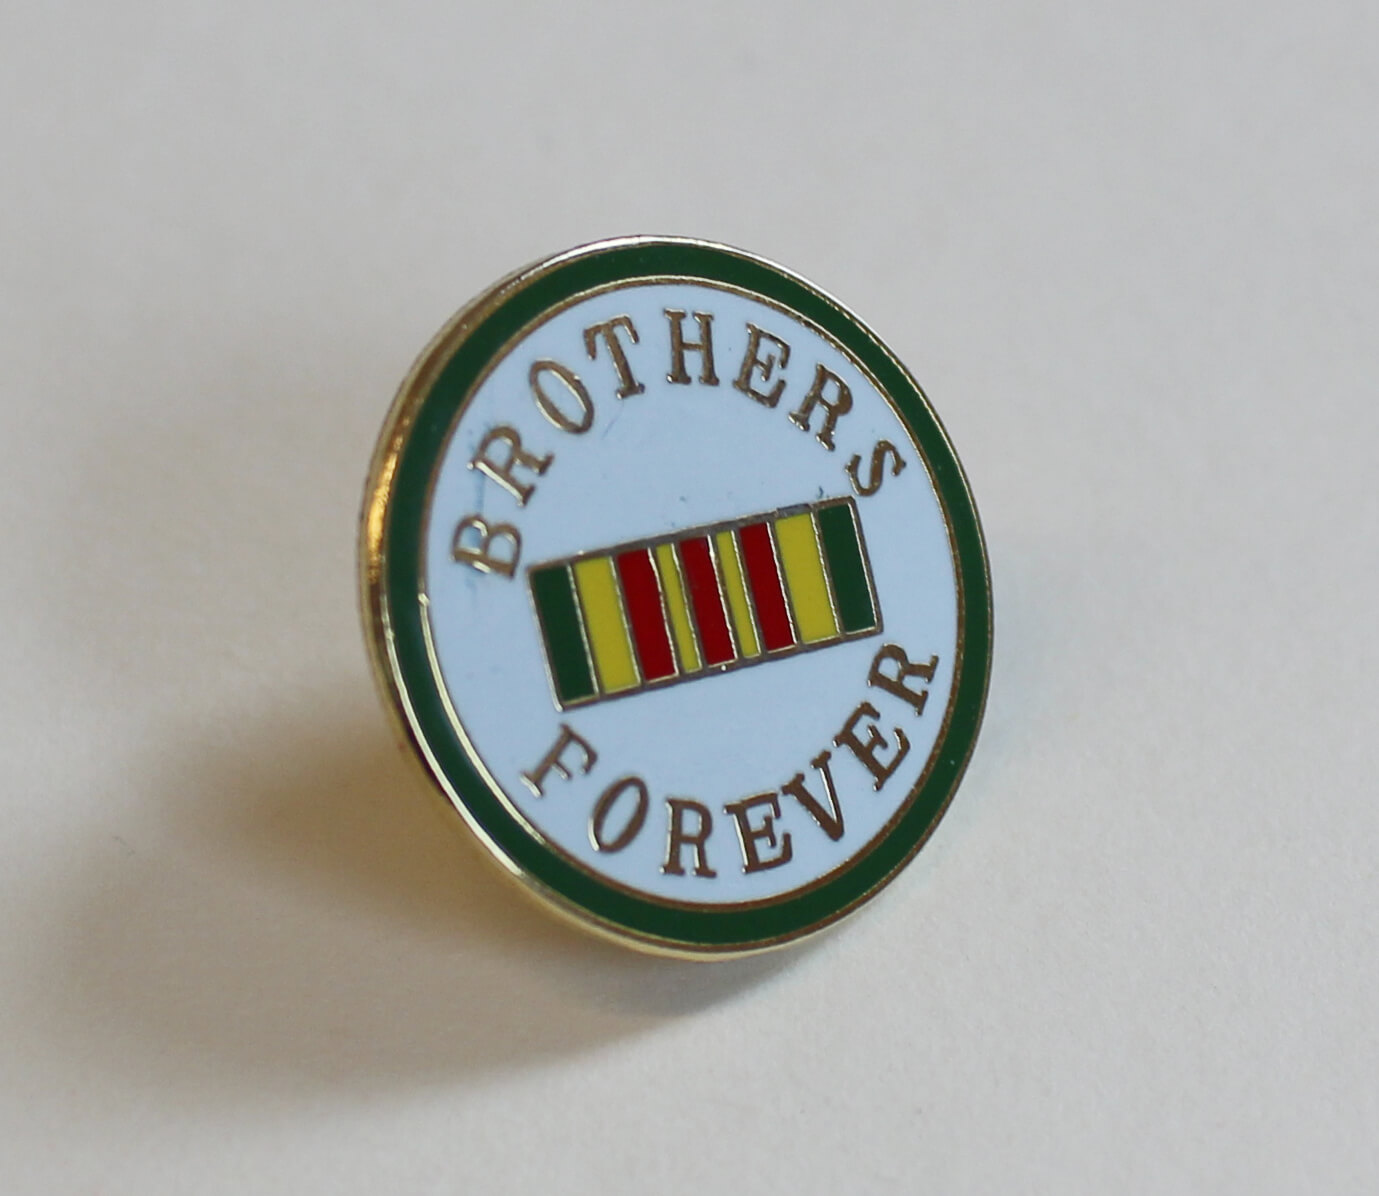 Brothers Forever military pin.